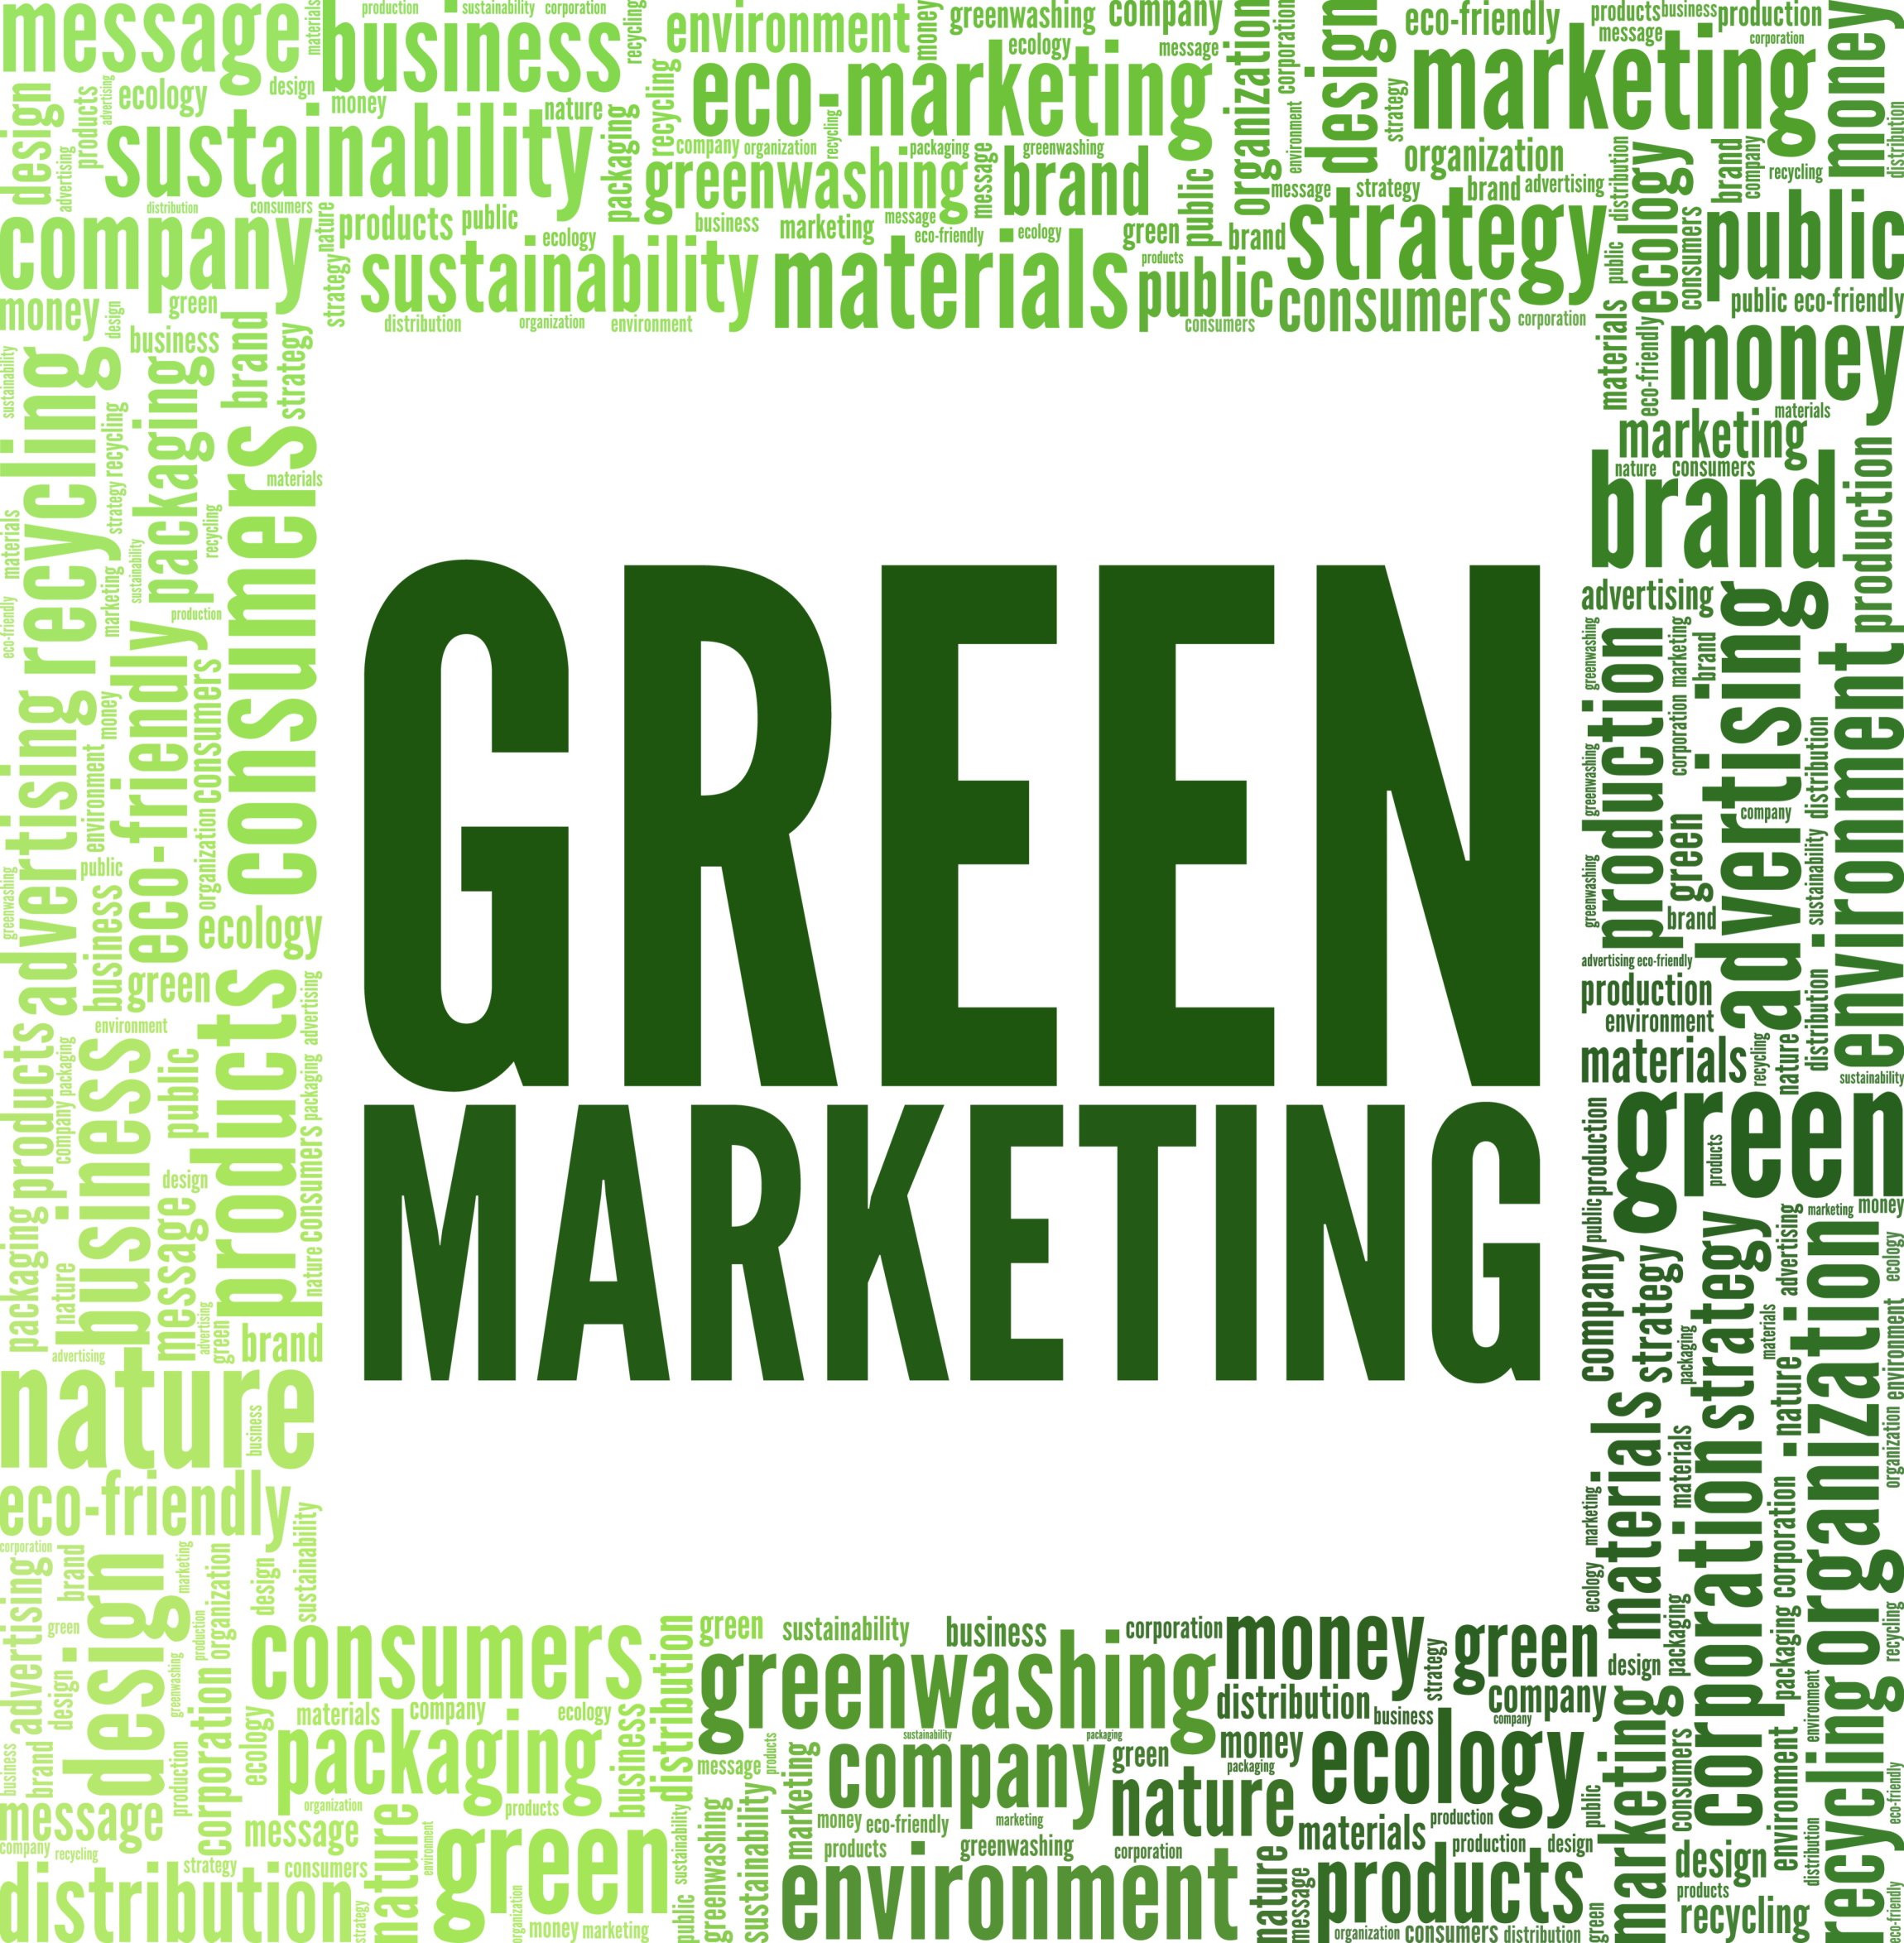 A Guide To Sustainable Marketing And Branding